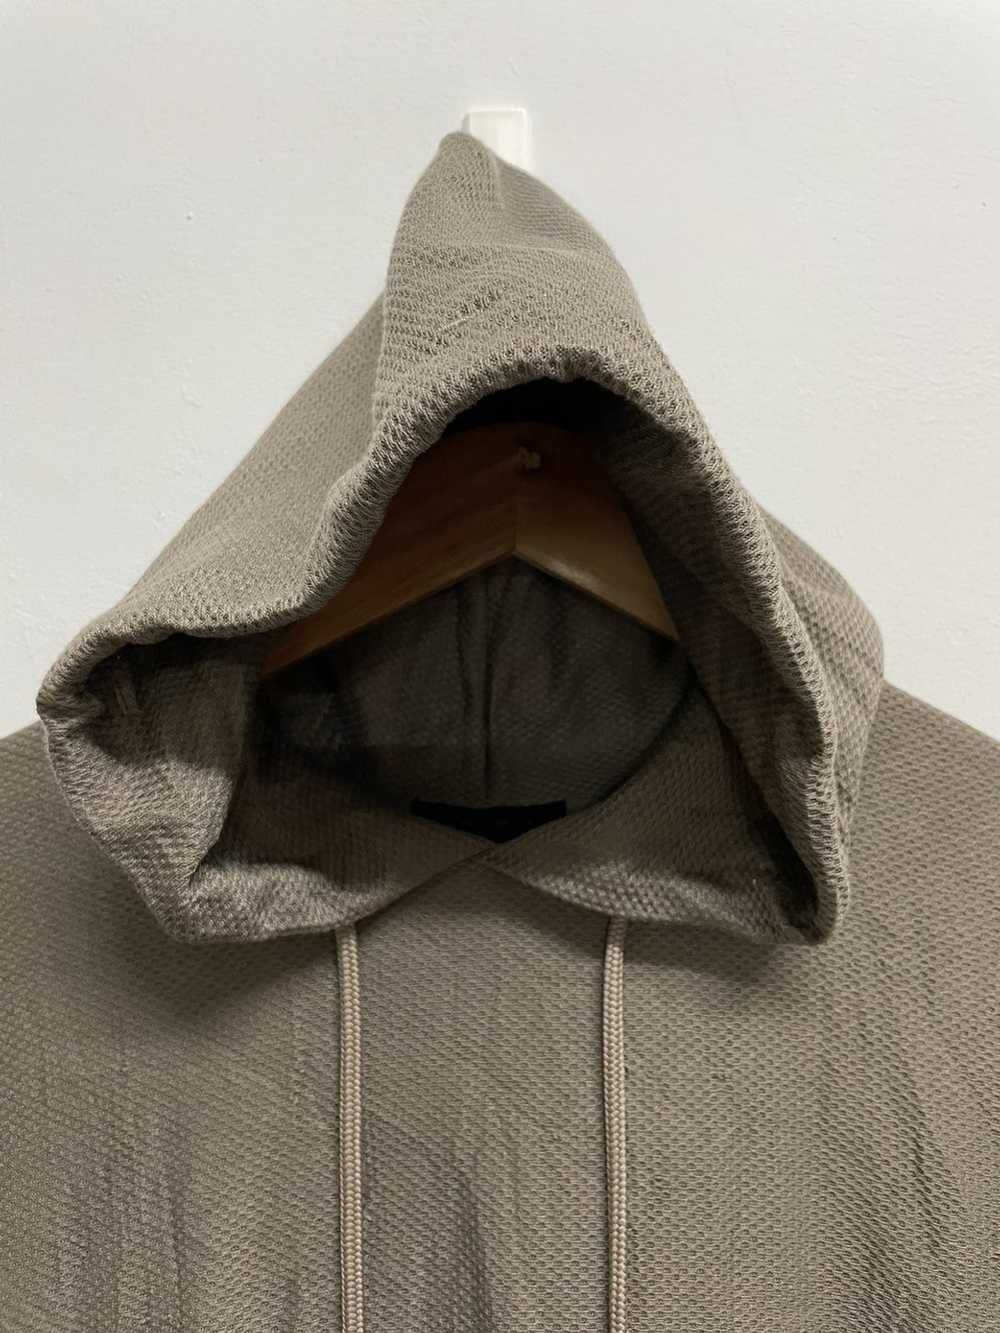 Comme Ca Ism × Japanese Brand Comme Ca Ism Hoodies - image 3